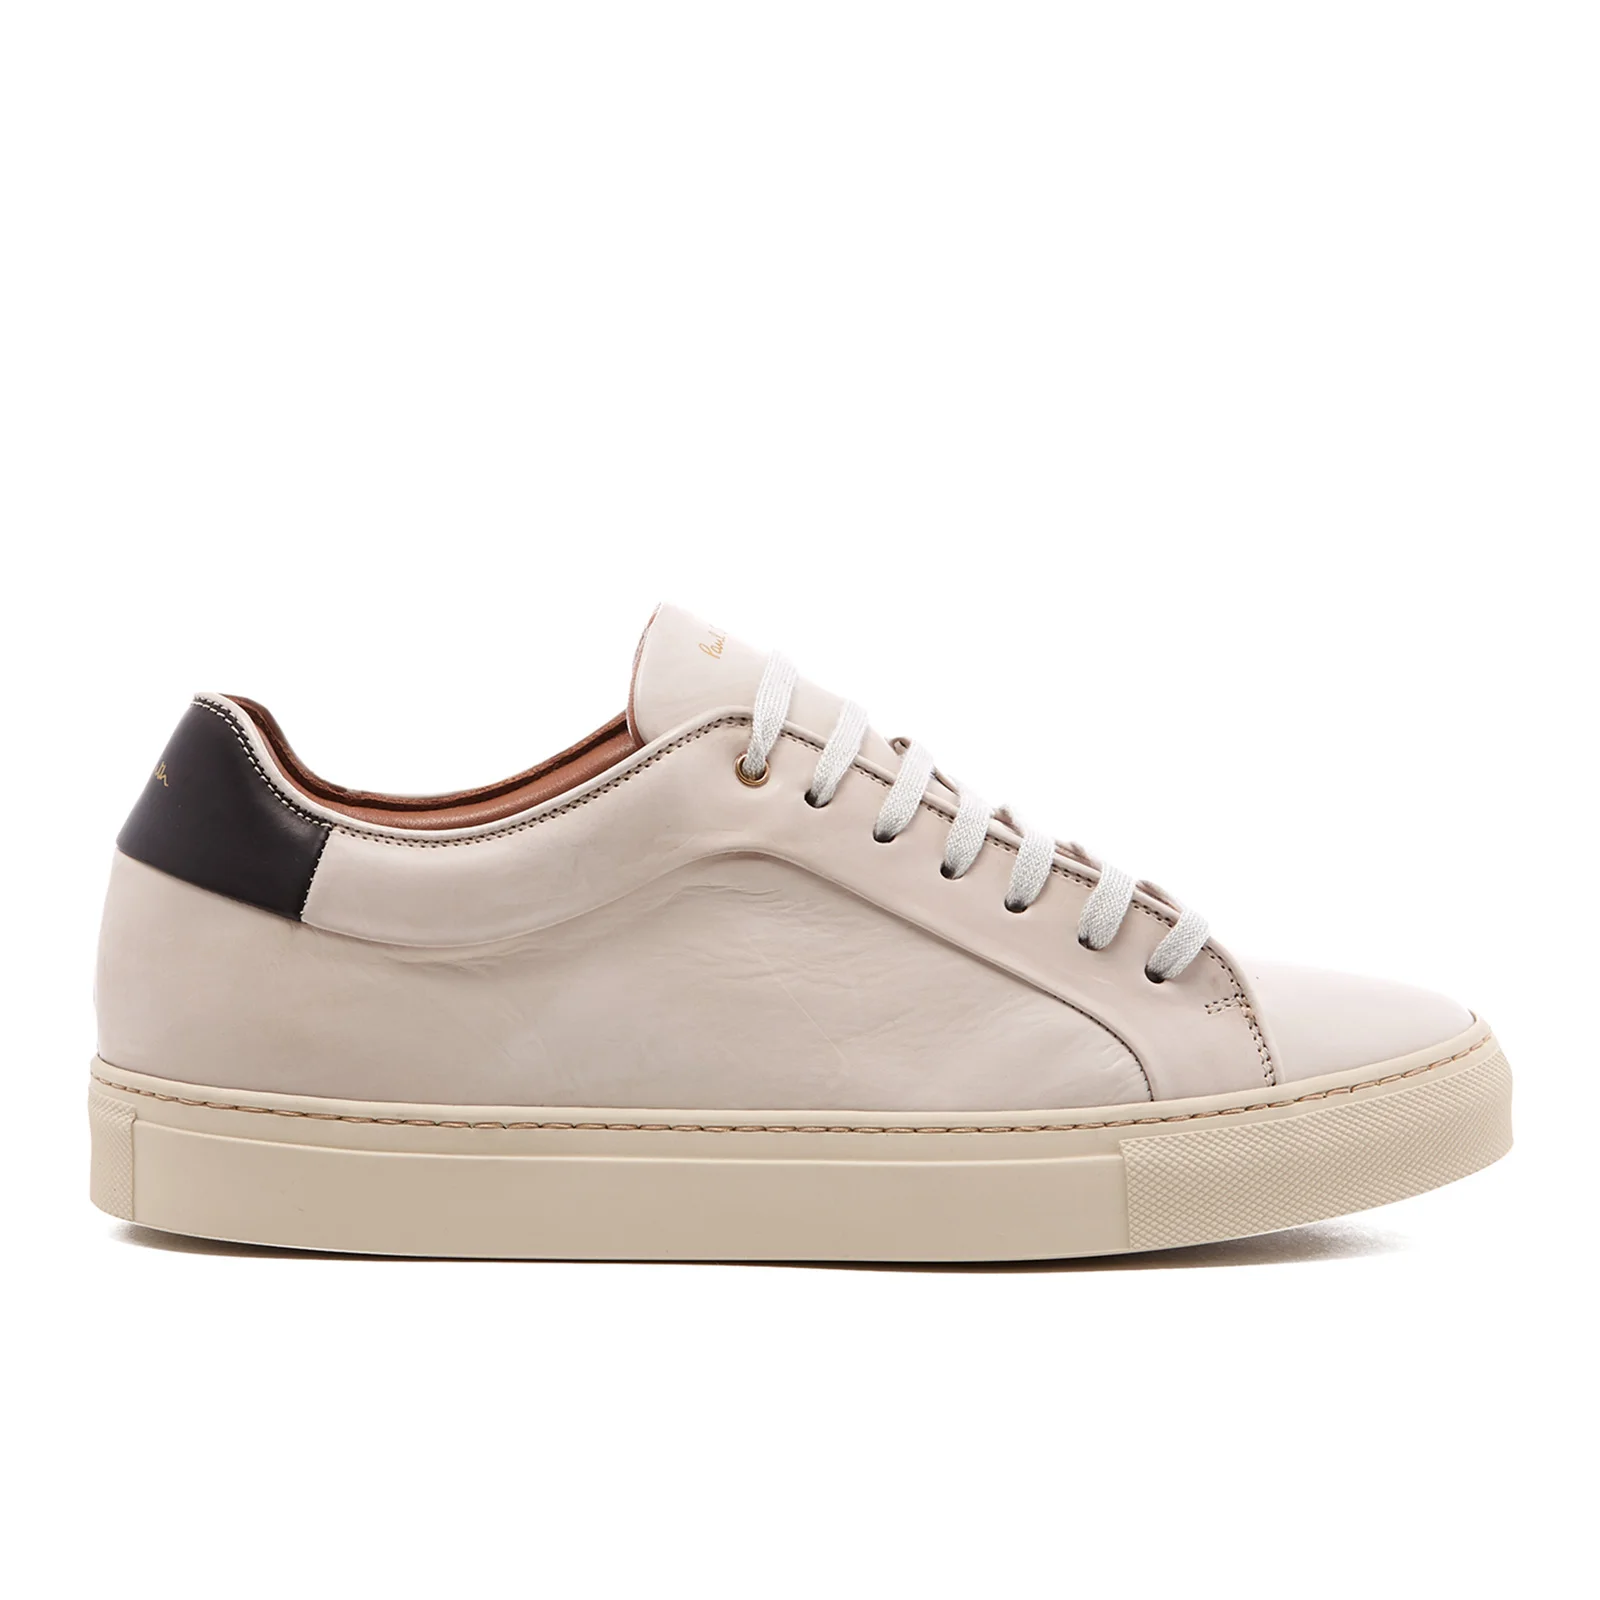 Paul Smith Men's Basso Leather Court Trainers - Quiet White Image 1